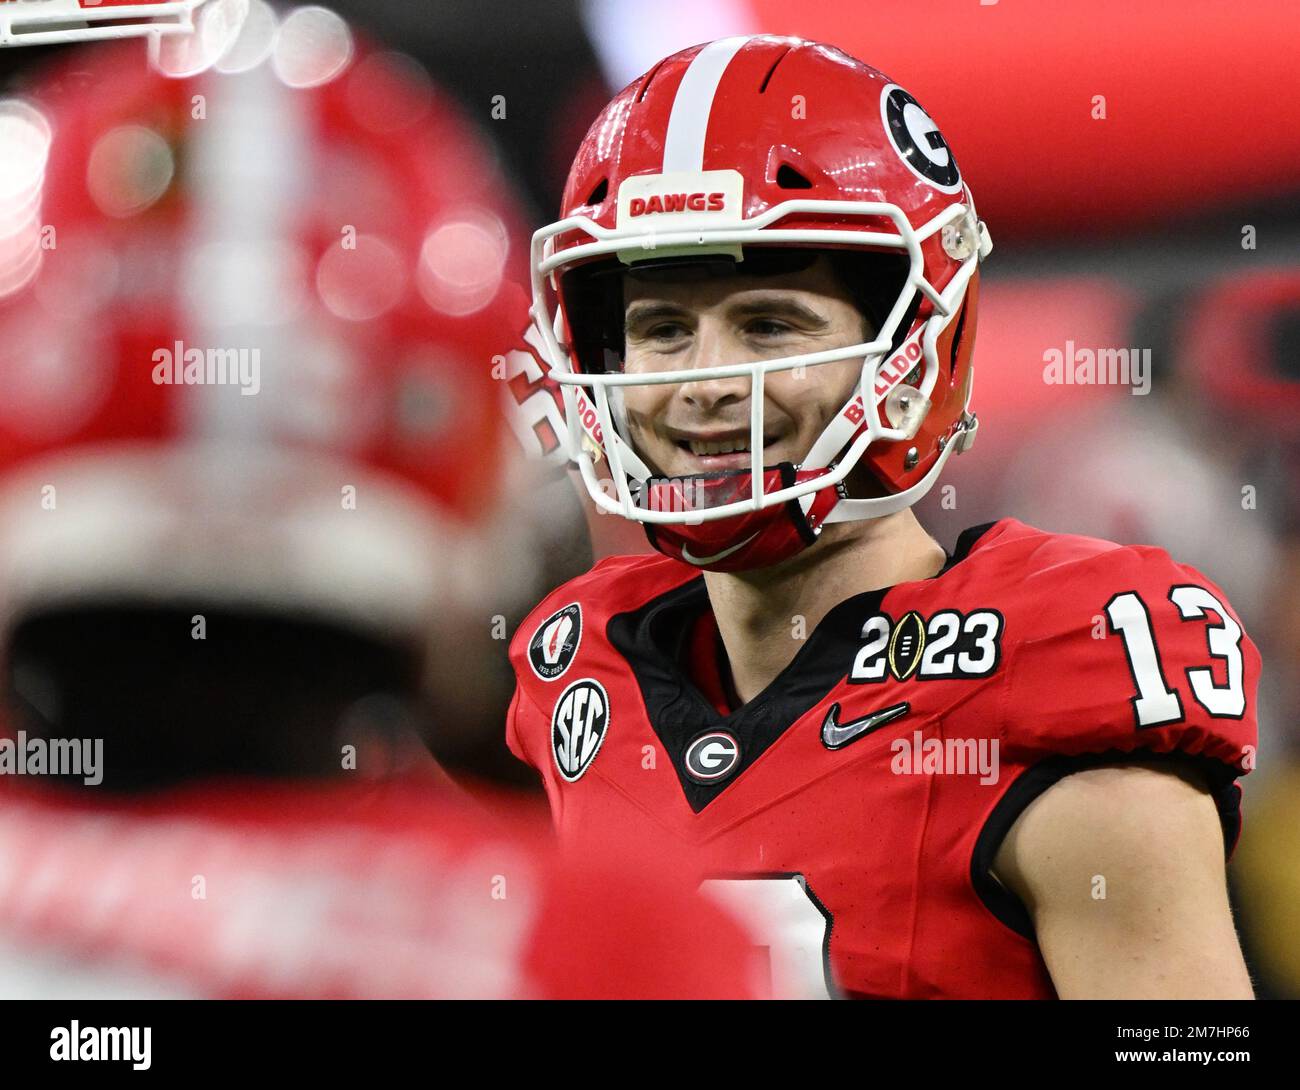 Inglewood, United States. 09th Jan, 2023. Georgia quarterback Stetson Bennett smiles in the fourth quarter against TCU in the 2023 NCAA College Football National Championship at SoFi Stadium in Inglewood, California, on Monday, January 9, 2023. The Bulldogs defeated the TCU Horned Frogs 65-7. Photo by Jon SooHoo/UPI Credit: UPI/Alamy Live News Stock Photo